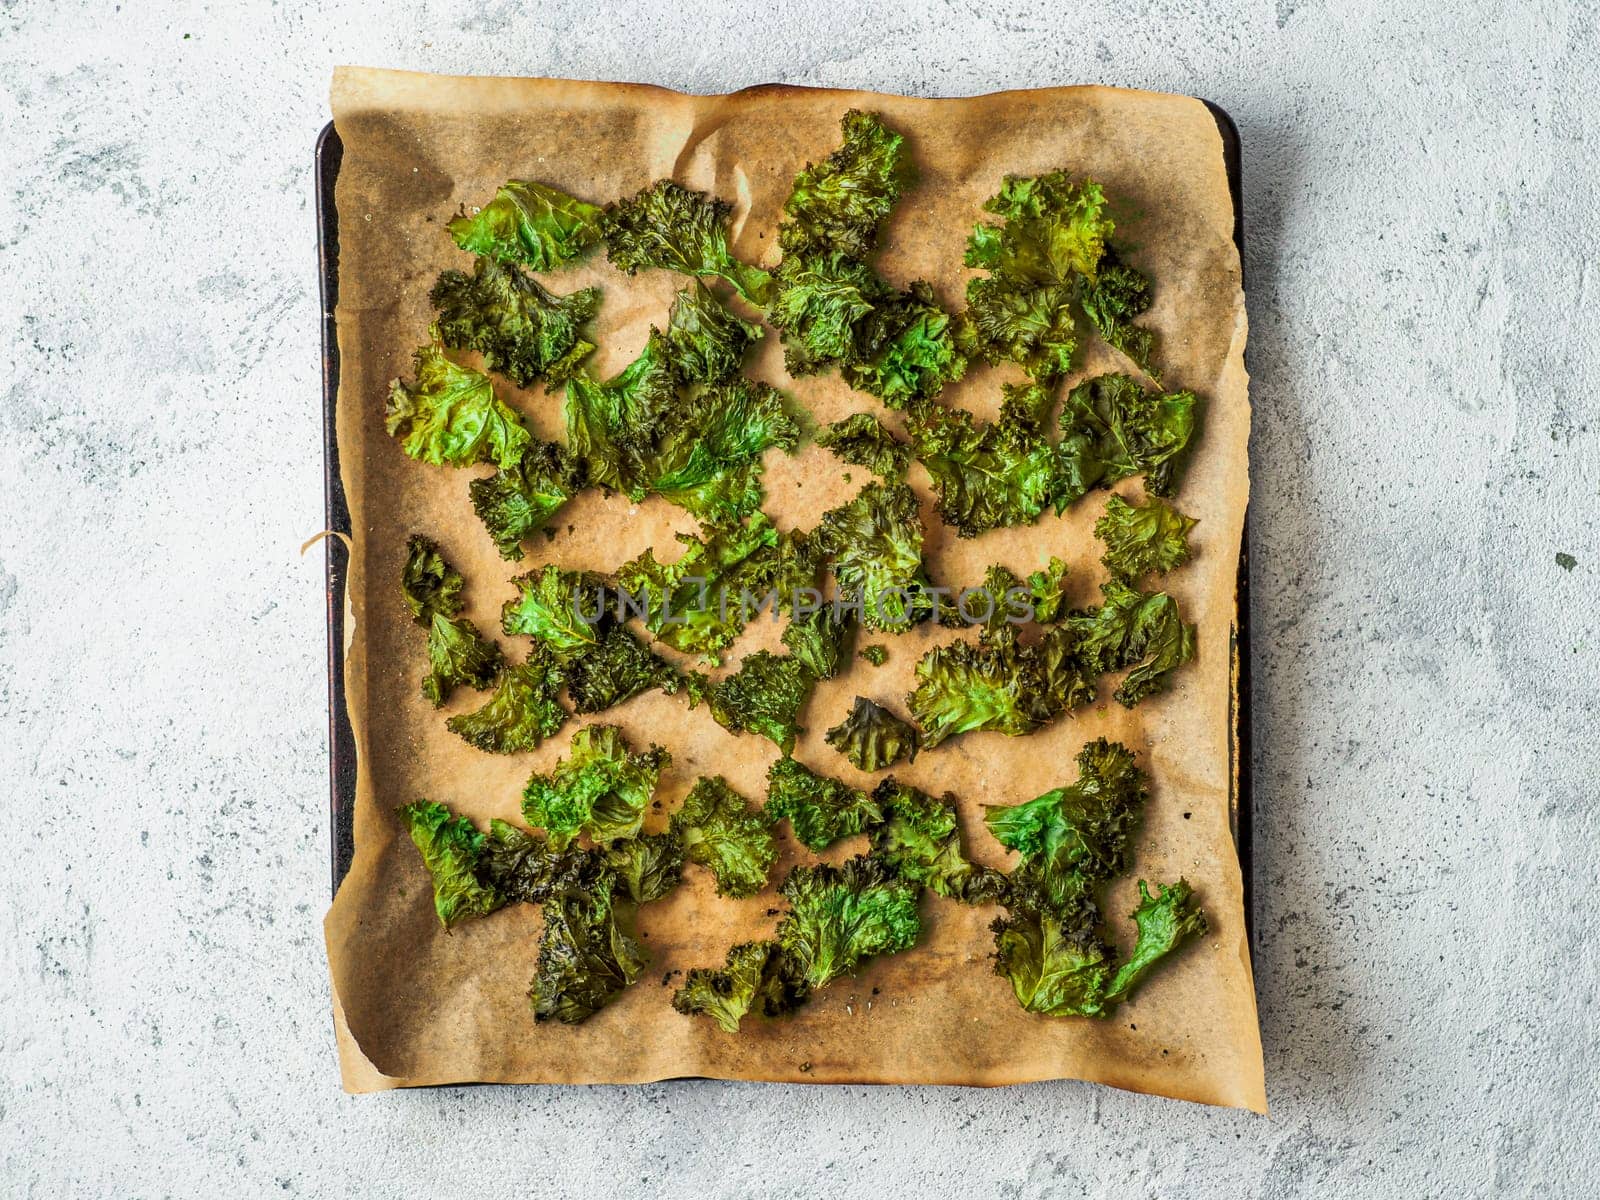 Green Kale Chips with salt on oven-tray. Homemade healthy snack for low carb, keto, low calorie diet. Gray cement background. Ready-to-eat kale chips, top view or flat lay.